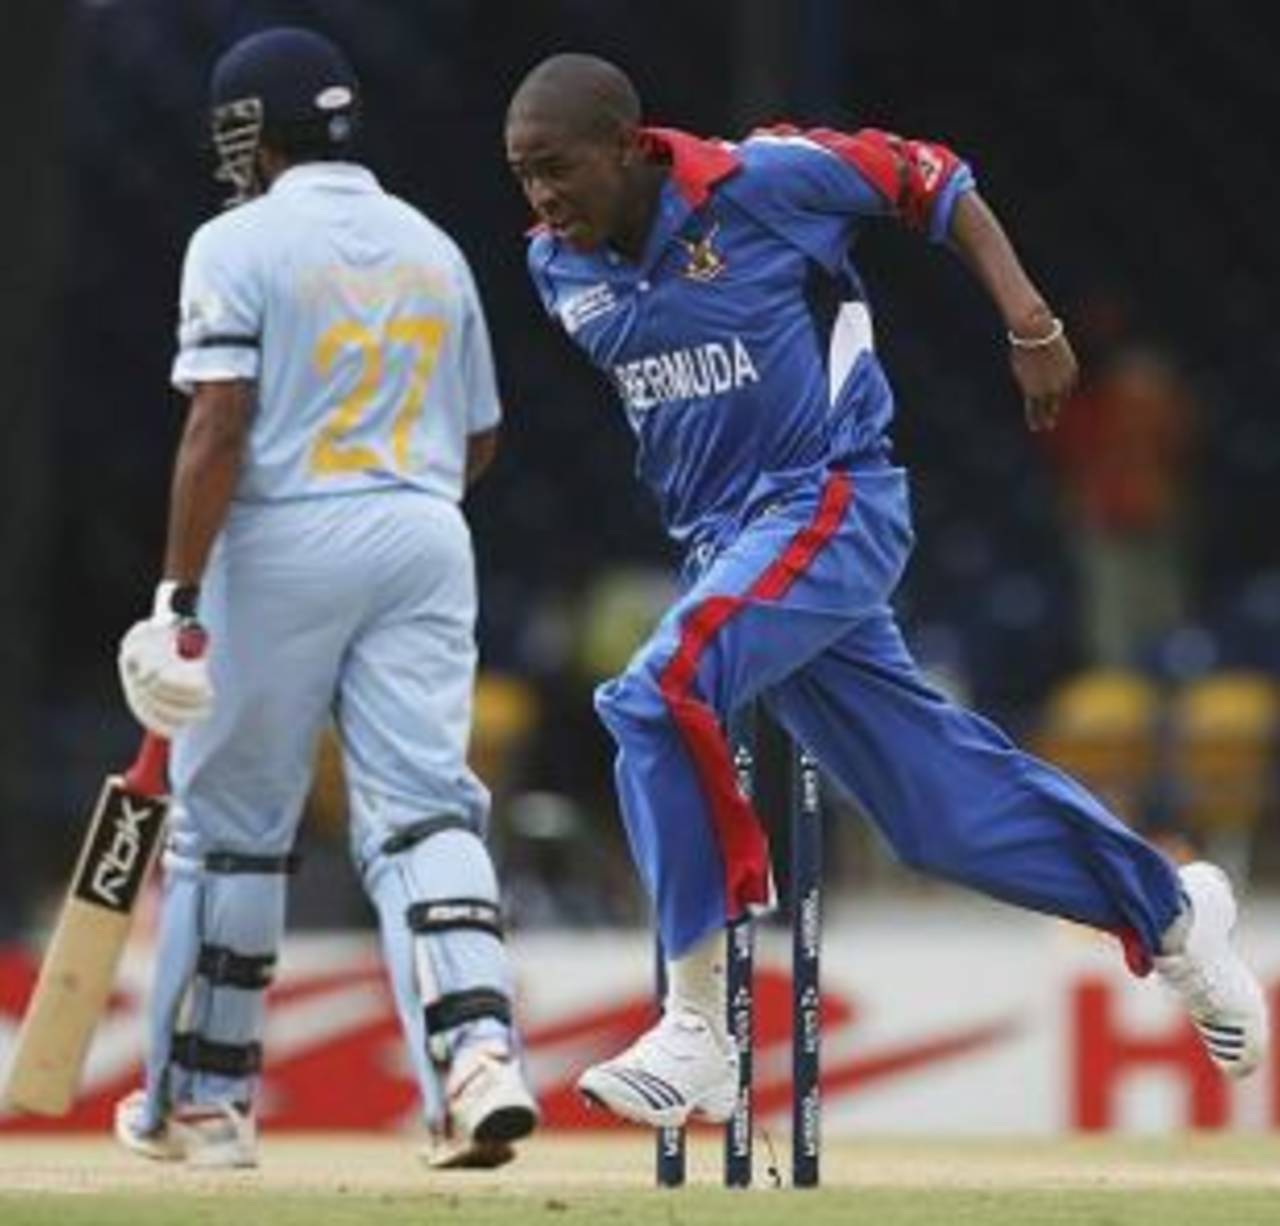 Malachi Jones dismissed Robin Uthappa with his first ball of the World Cup, Bermuda v India, Group B, Trinidad, March 19, 2007